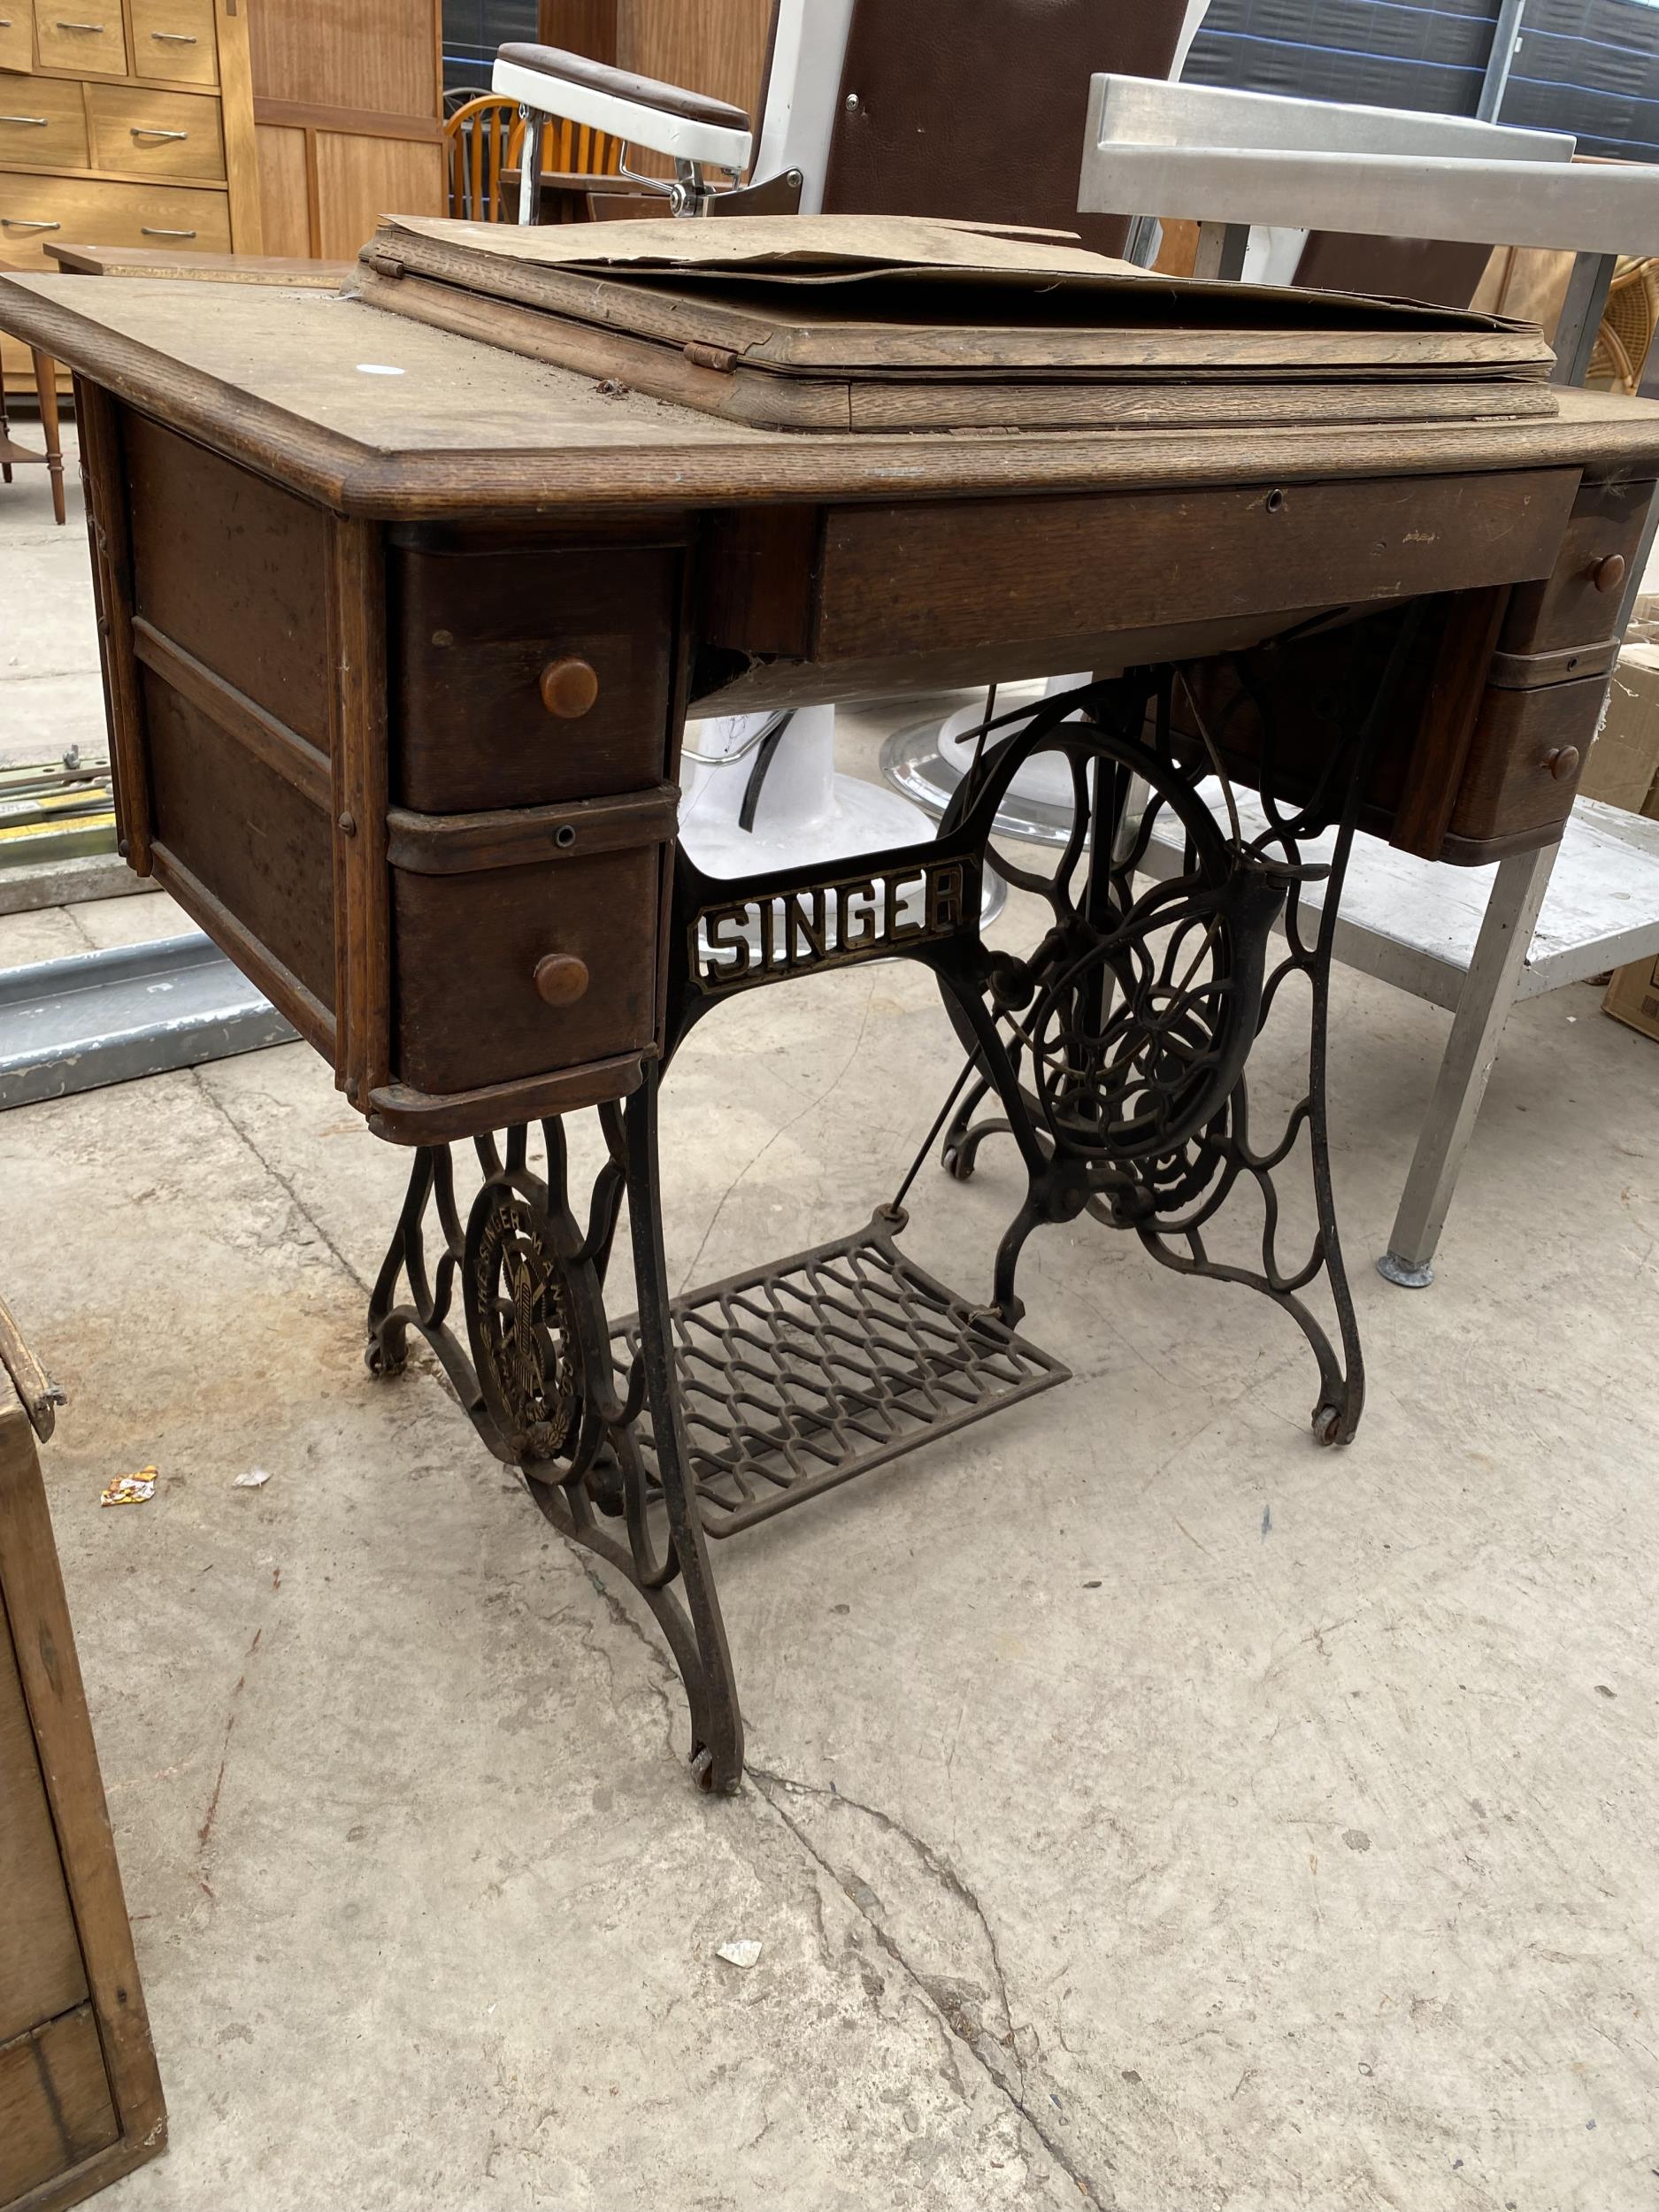 A VINTAGE SINGER SEWING MACHINE WITH CAST TREDDLE BASE - Image 2 of 5